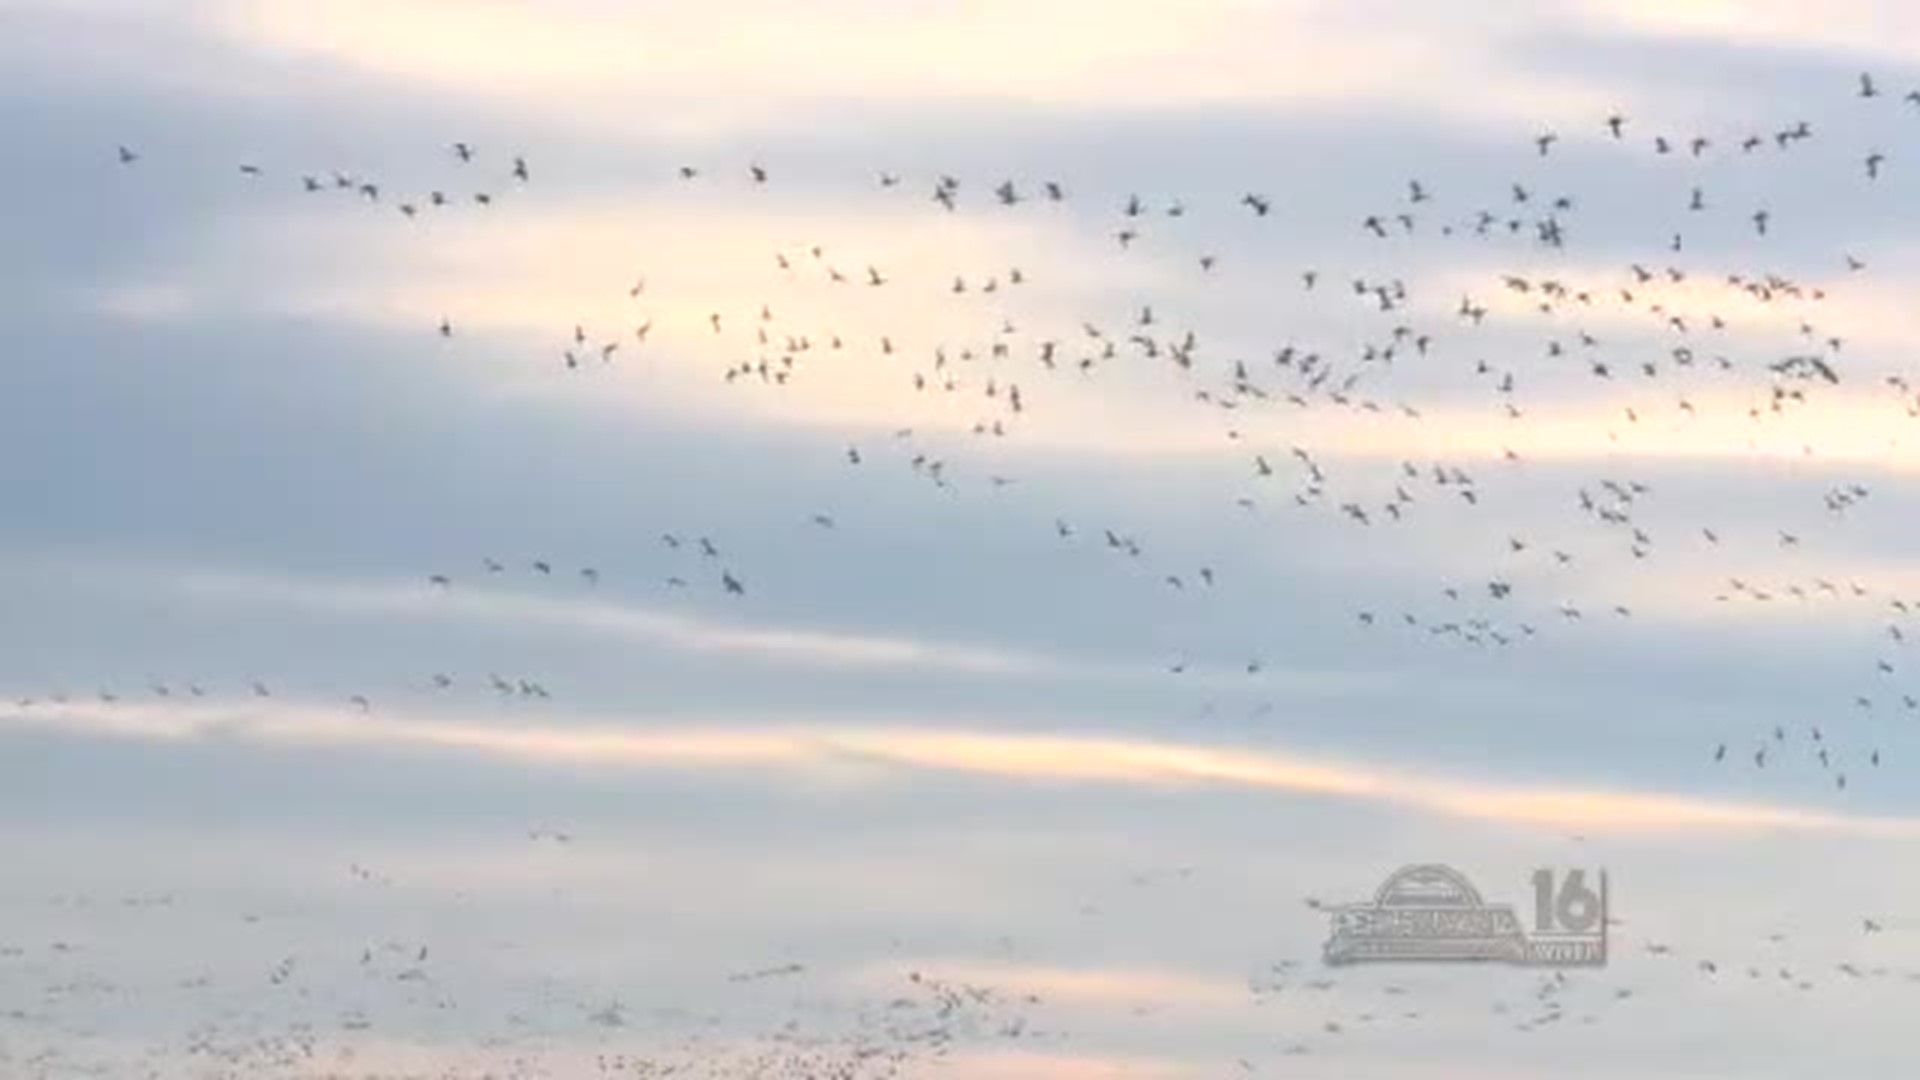 Snow Geese Migration in Middlecreek